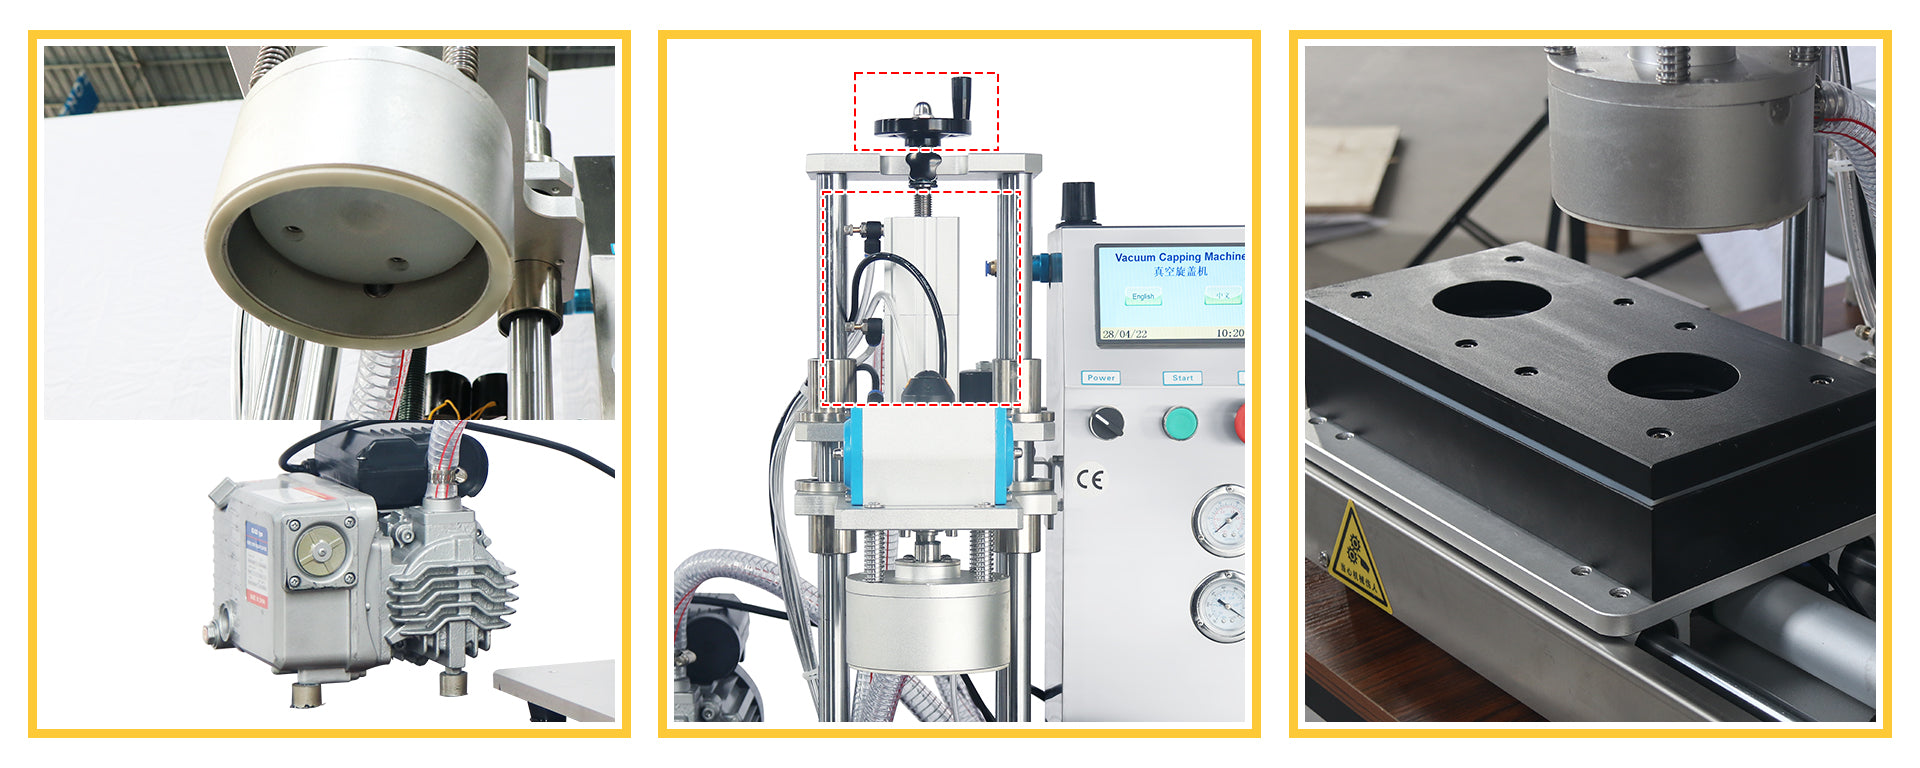 Semi-Automatic Vacuum Sealing Machine: Perfect Combination of Freshness and Convenience